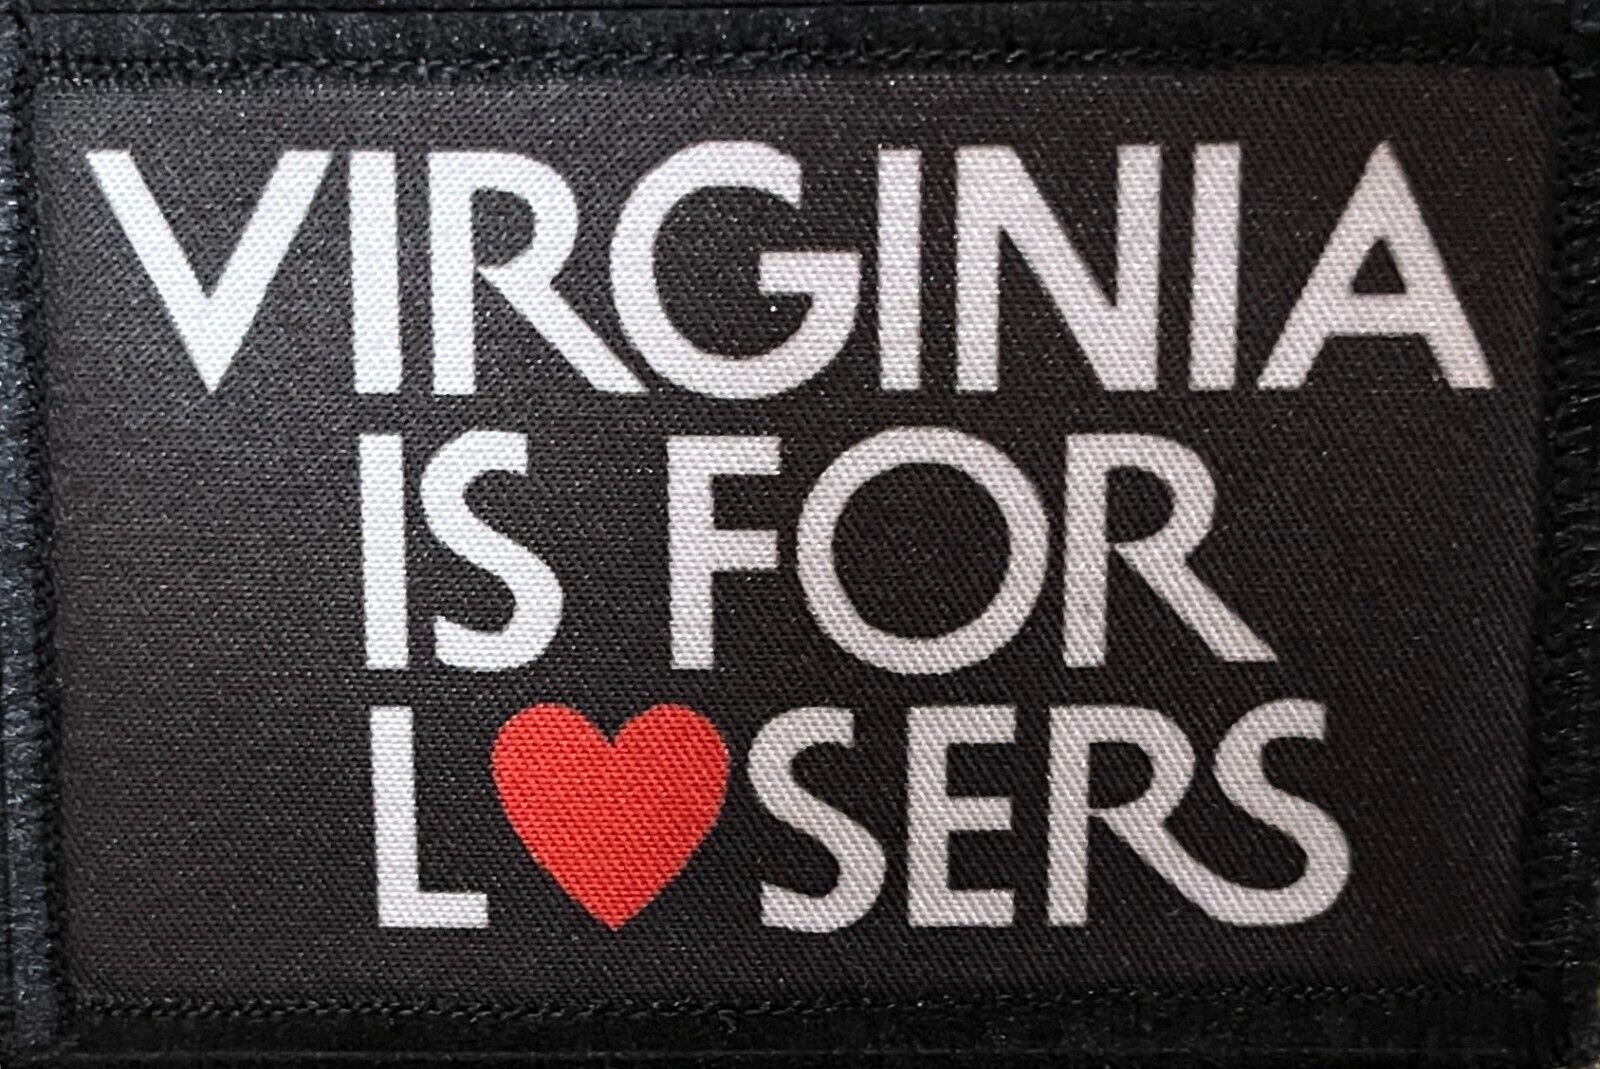 Virginia is for Losers Morale Patch Military Tactical Army Badge Hook Tab